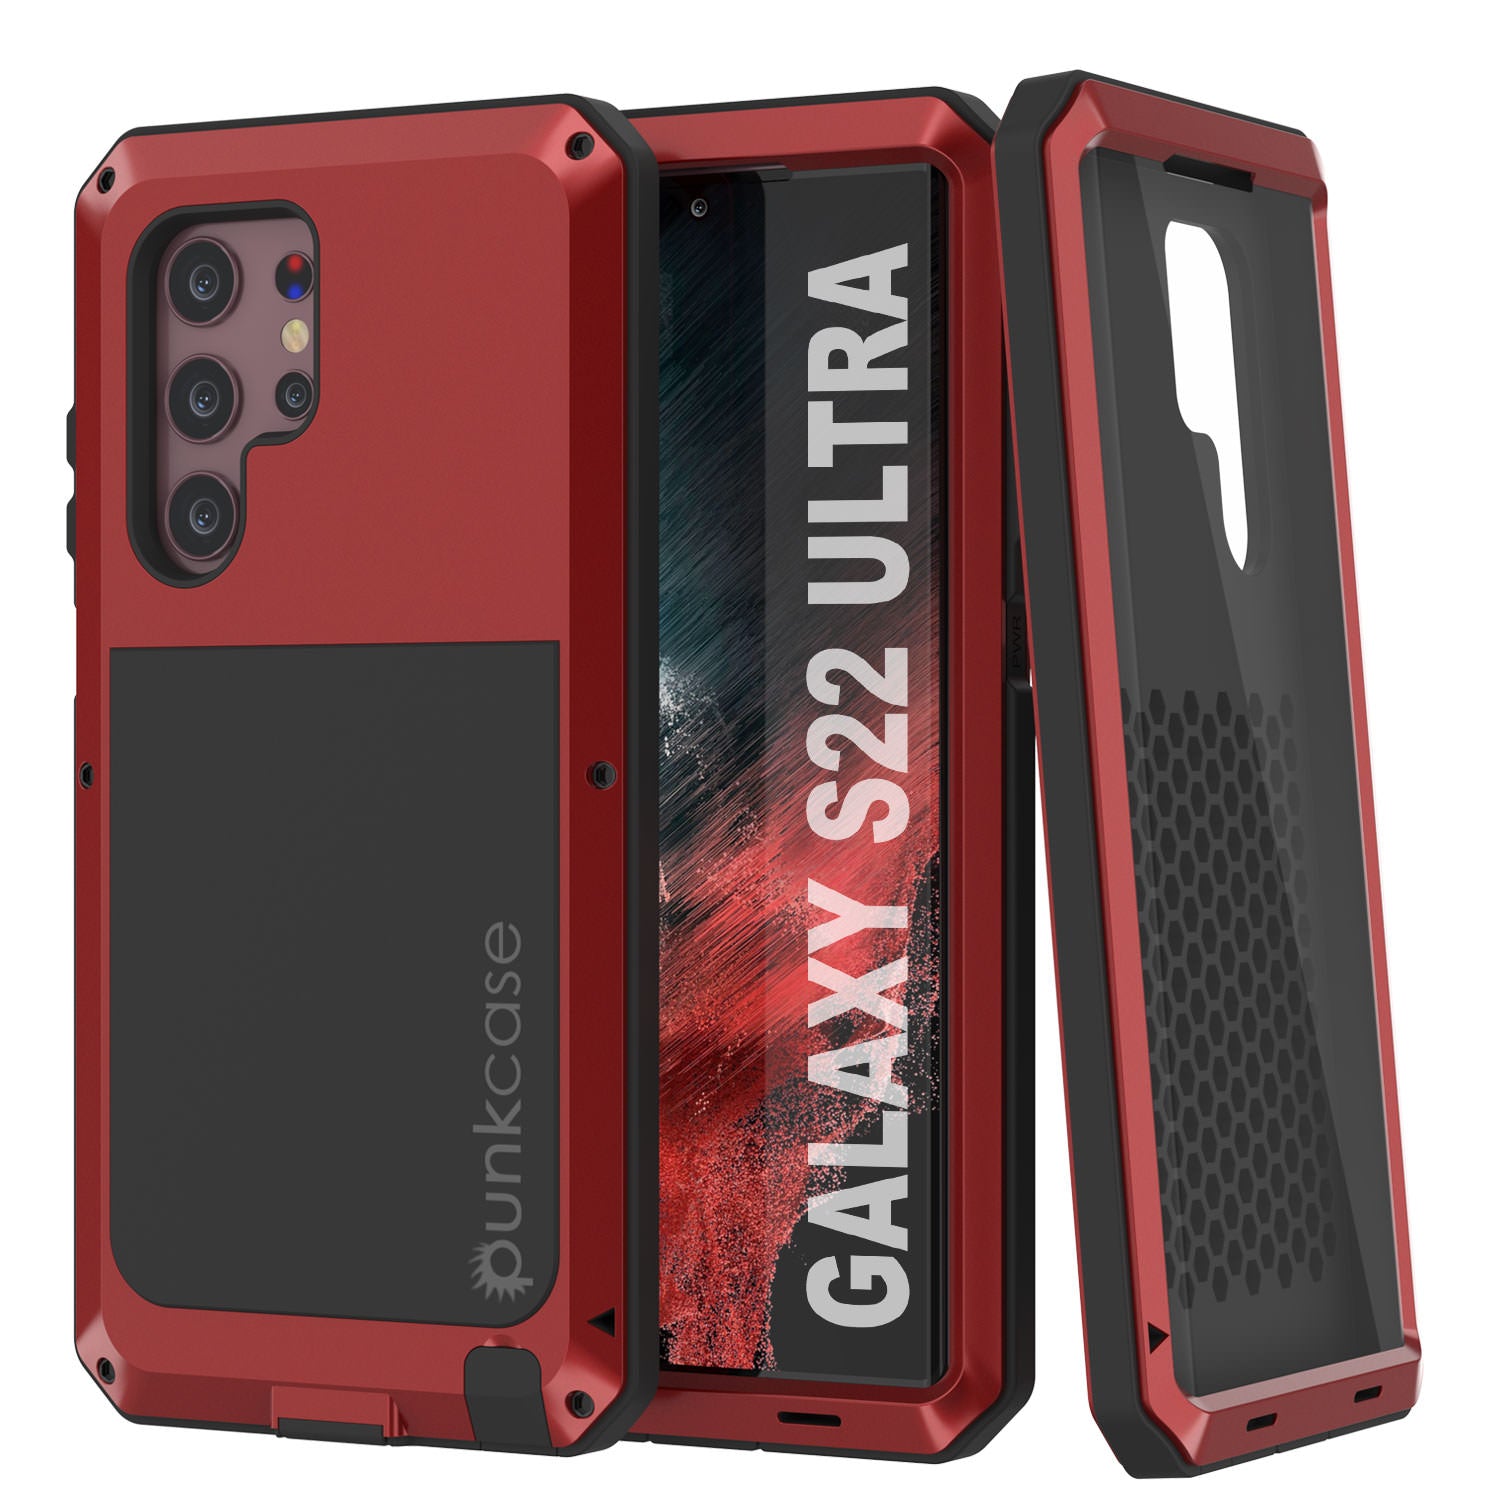 https://www.punkcase.com/cdn/shop/products/galaxy-s22-ultra-metal-case-dual-layer-innovative-design-heavy-duty-protection-military-grade-rugged-armor-cover-shock-proof-hybrid-full-body-hard-aluminum-tpu-design-non-slip-w-prime_a36746e8-48b4-4339-b31e-c8a10e54c277.jpg?v=1648833347